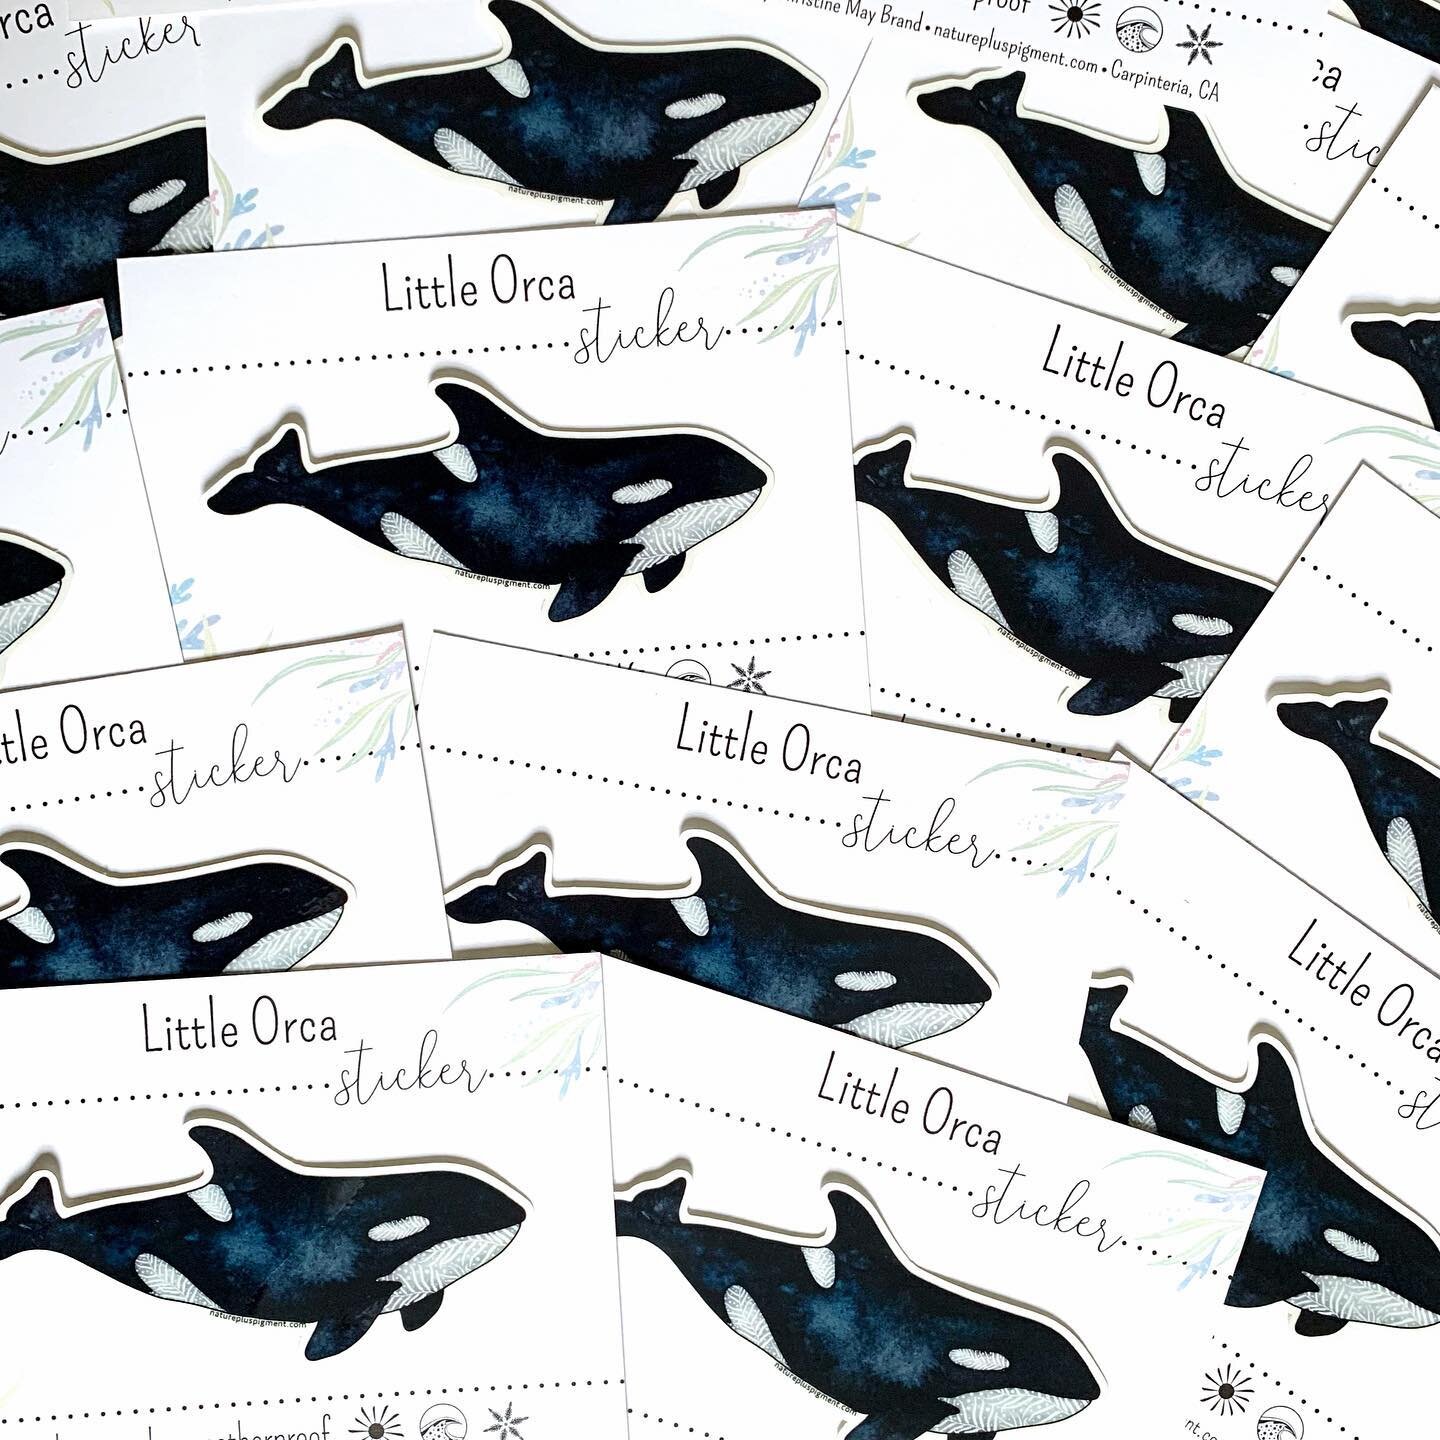 Lots of little orcas on the packing table today! 🖤🤍
.
.
.
#naturepluspigment #orcawhale #orcas #killerwhale #stickerlove #fairewholesale @faire_wholesale #artistmade #illustration #artistsoninstagram #oceanstickers #seacreatures #whalewatching #pac